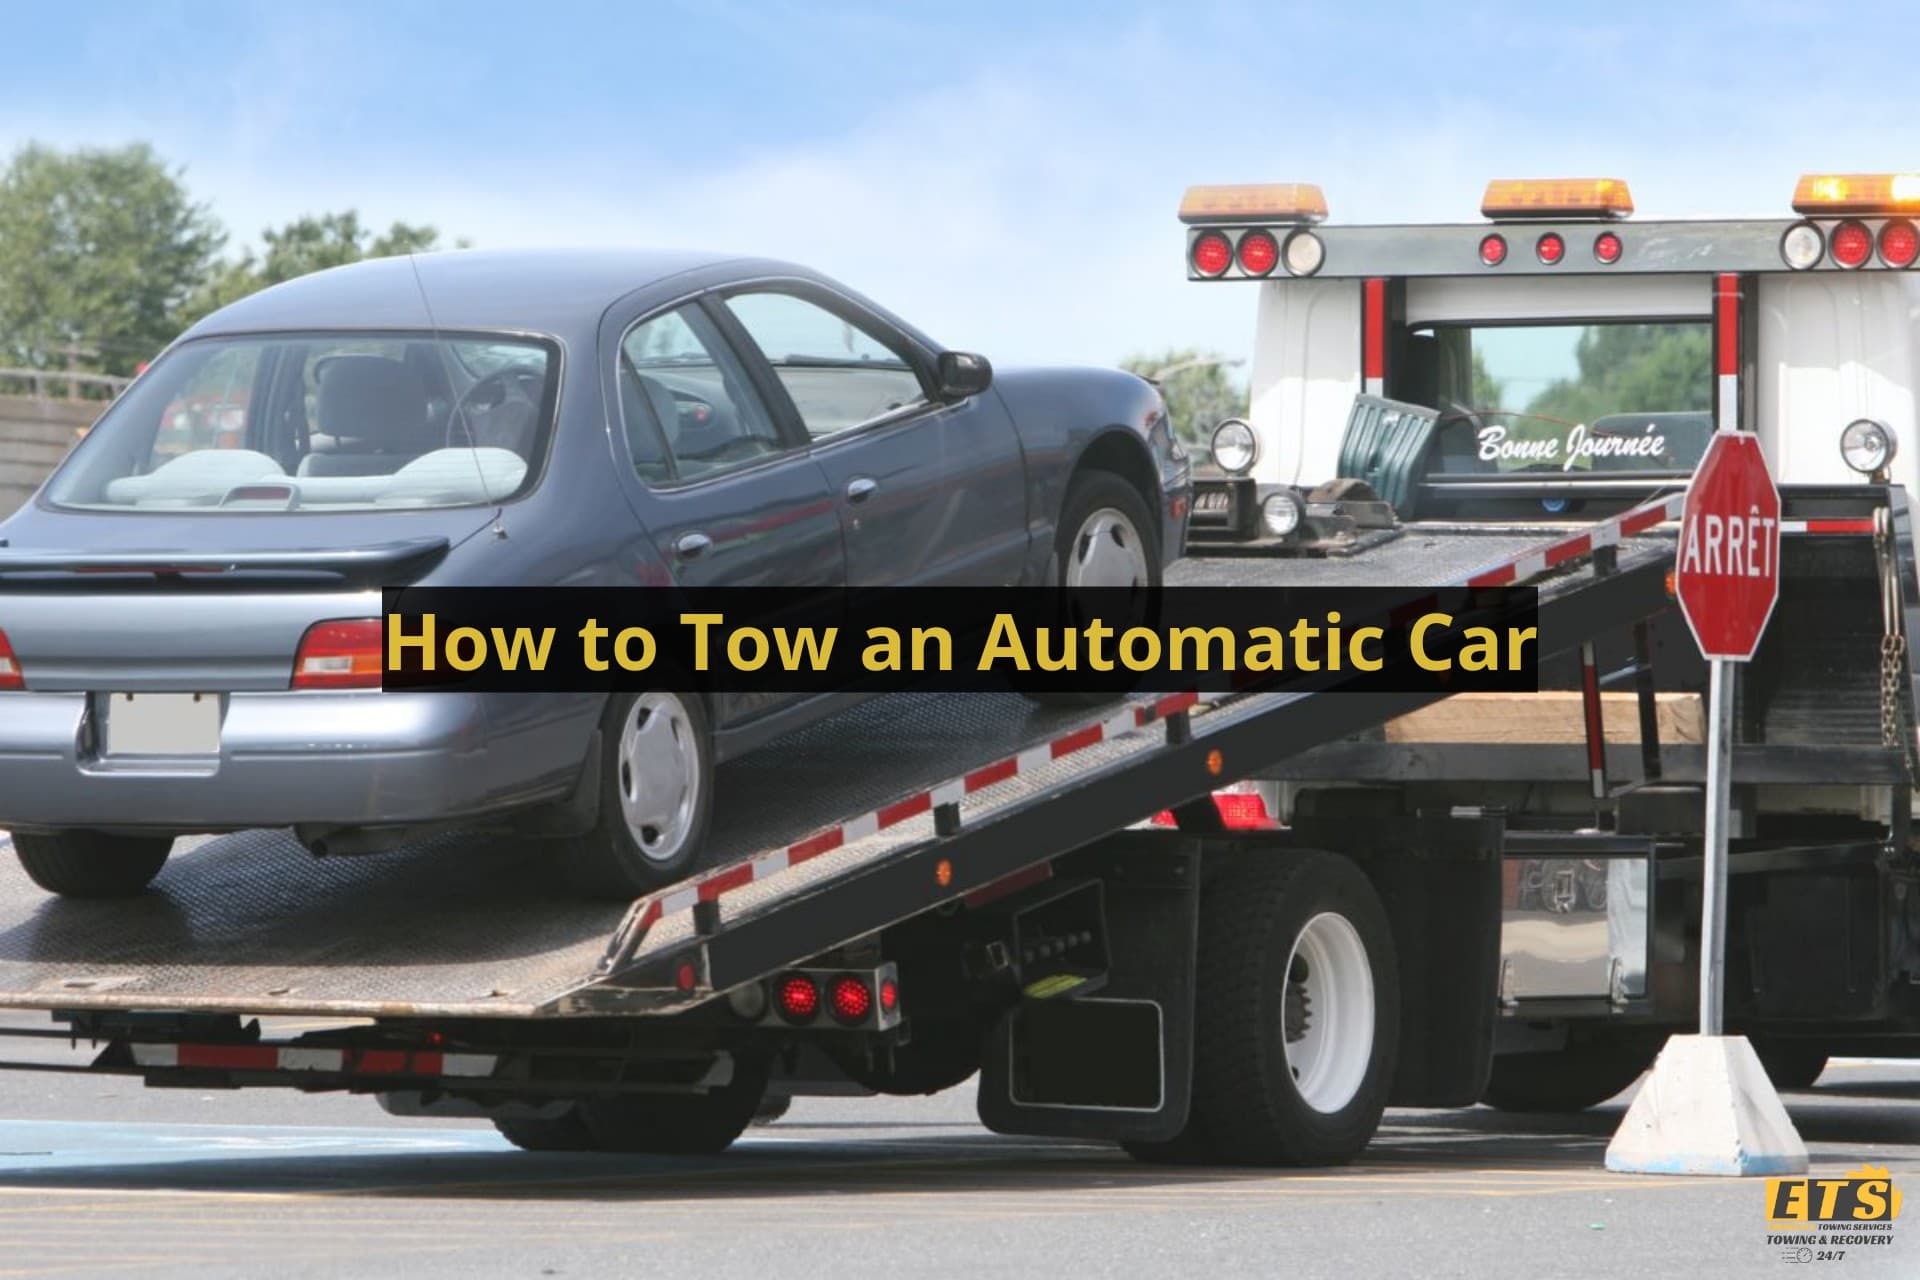 How to Tow an Automatic Car